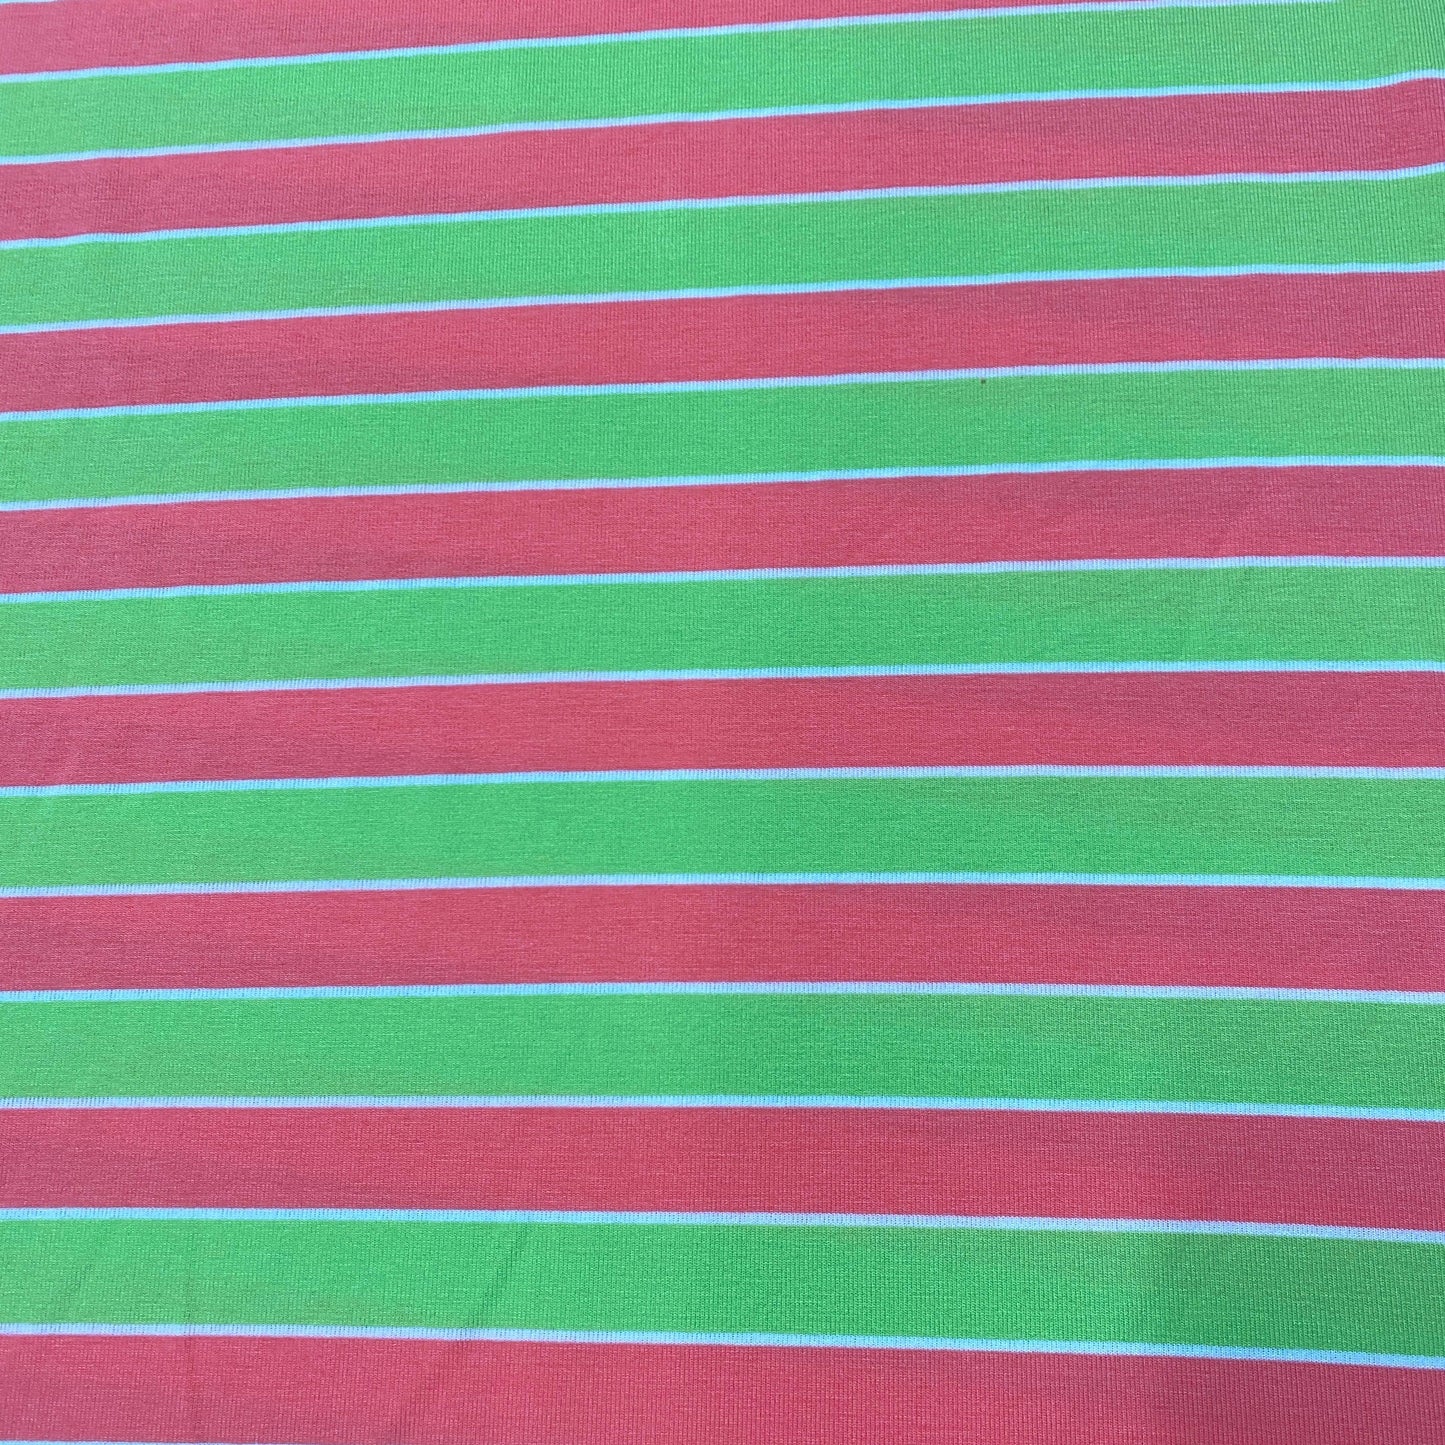 Orange and Lime 1" Stripes on Cotton/Spandex Jersey Fabric - Nature's Fabrics